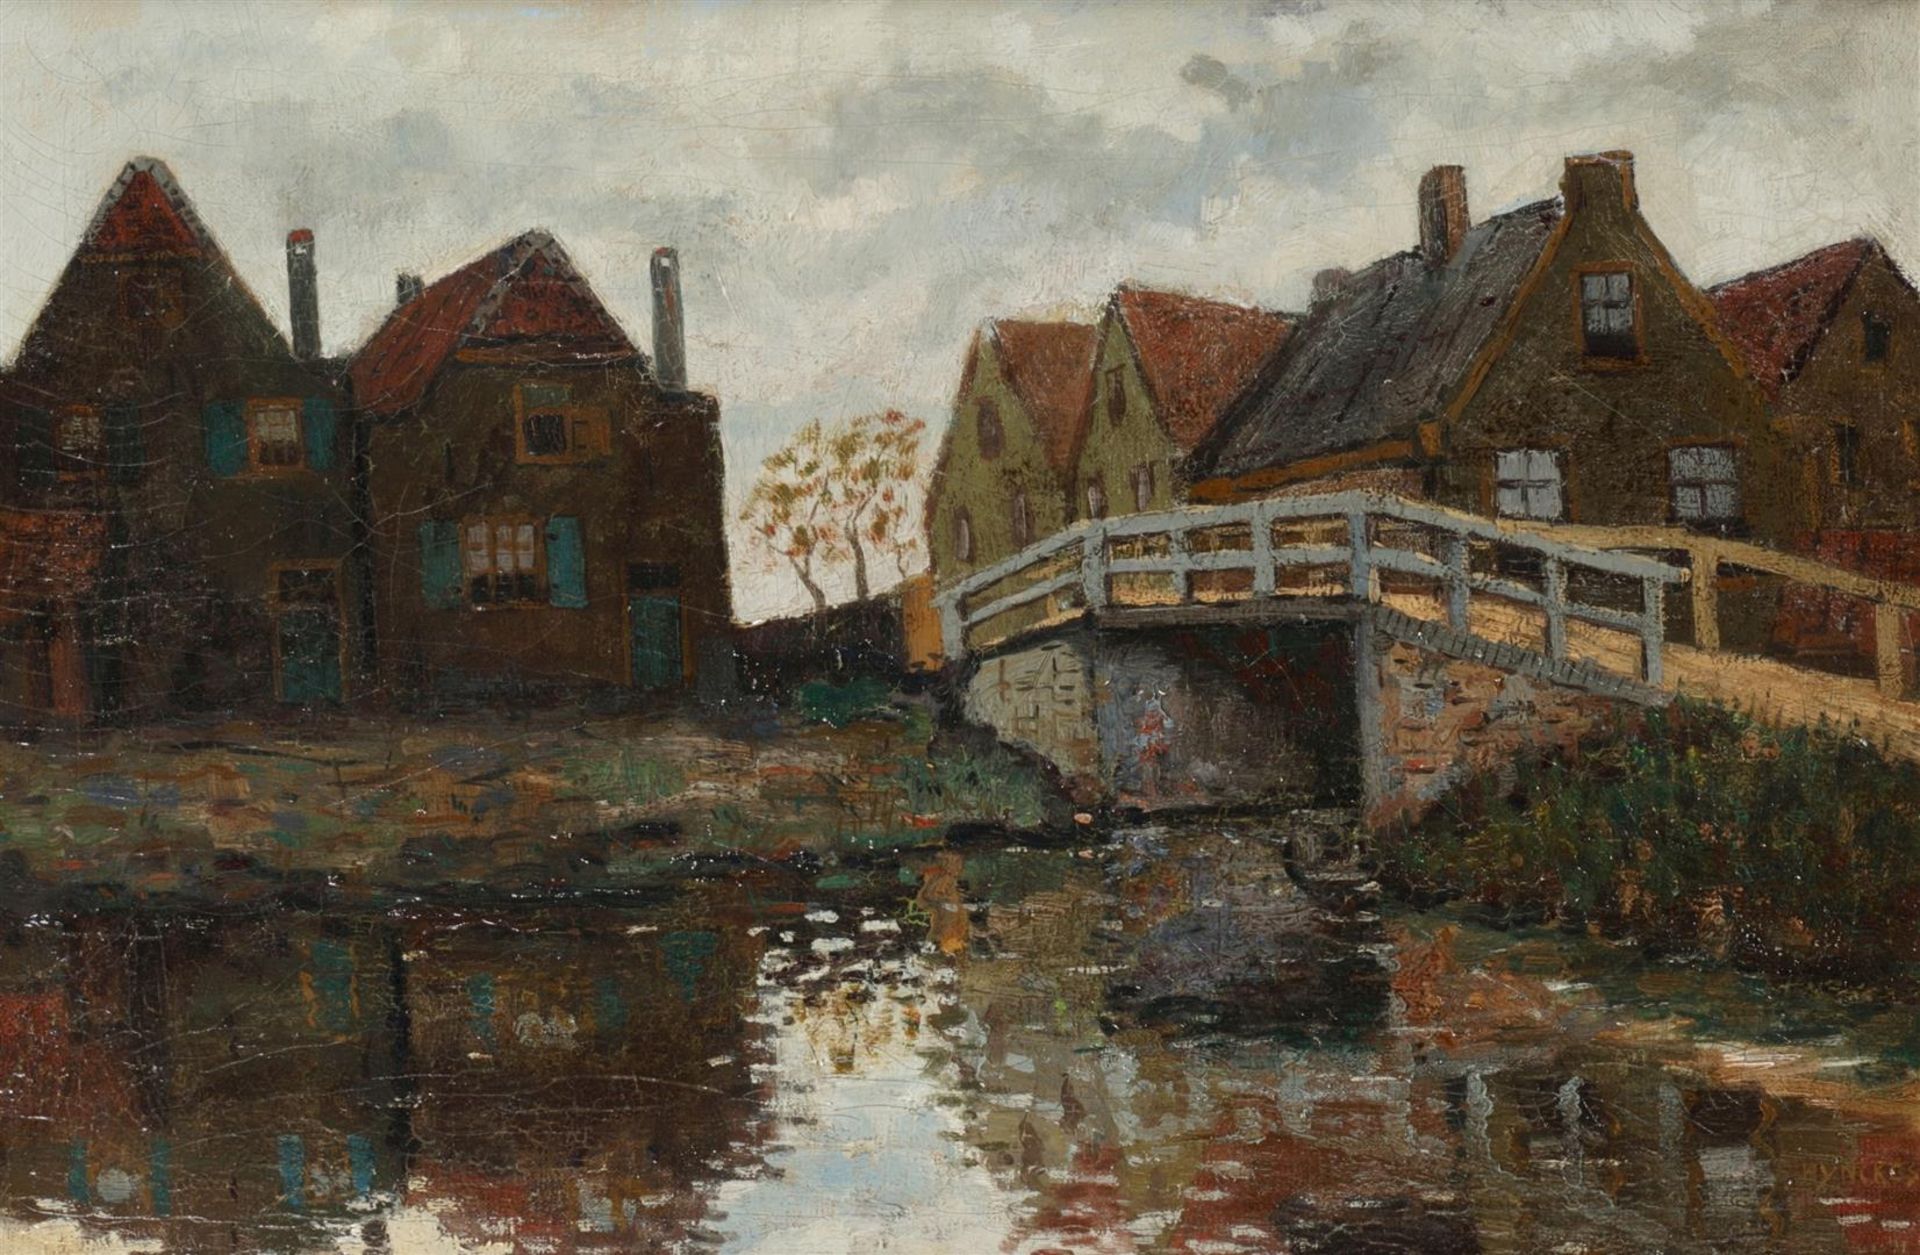 Raoul Hynckes, (1893-1973)
A village on the water, signed (